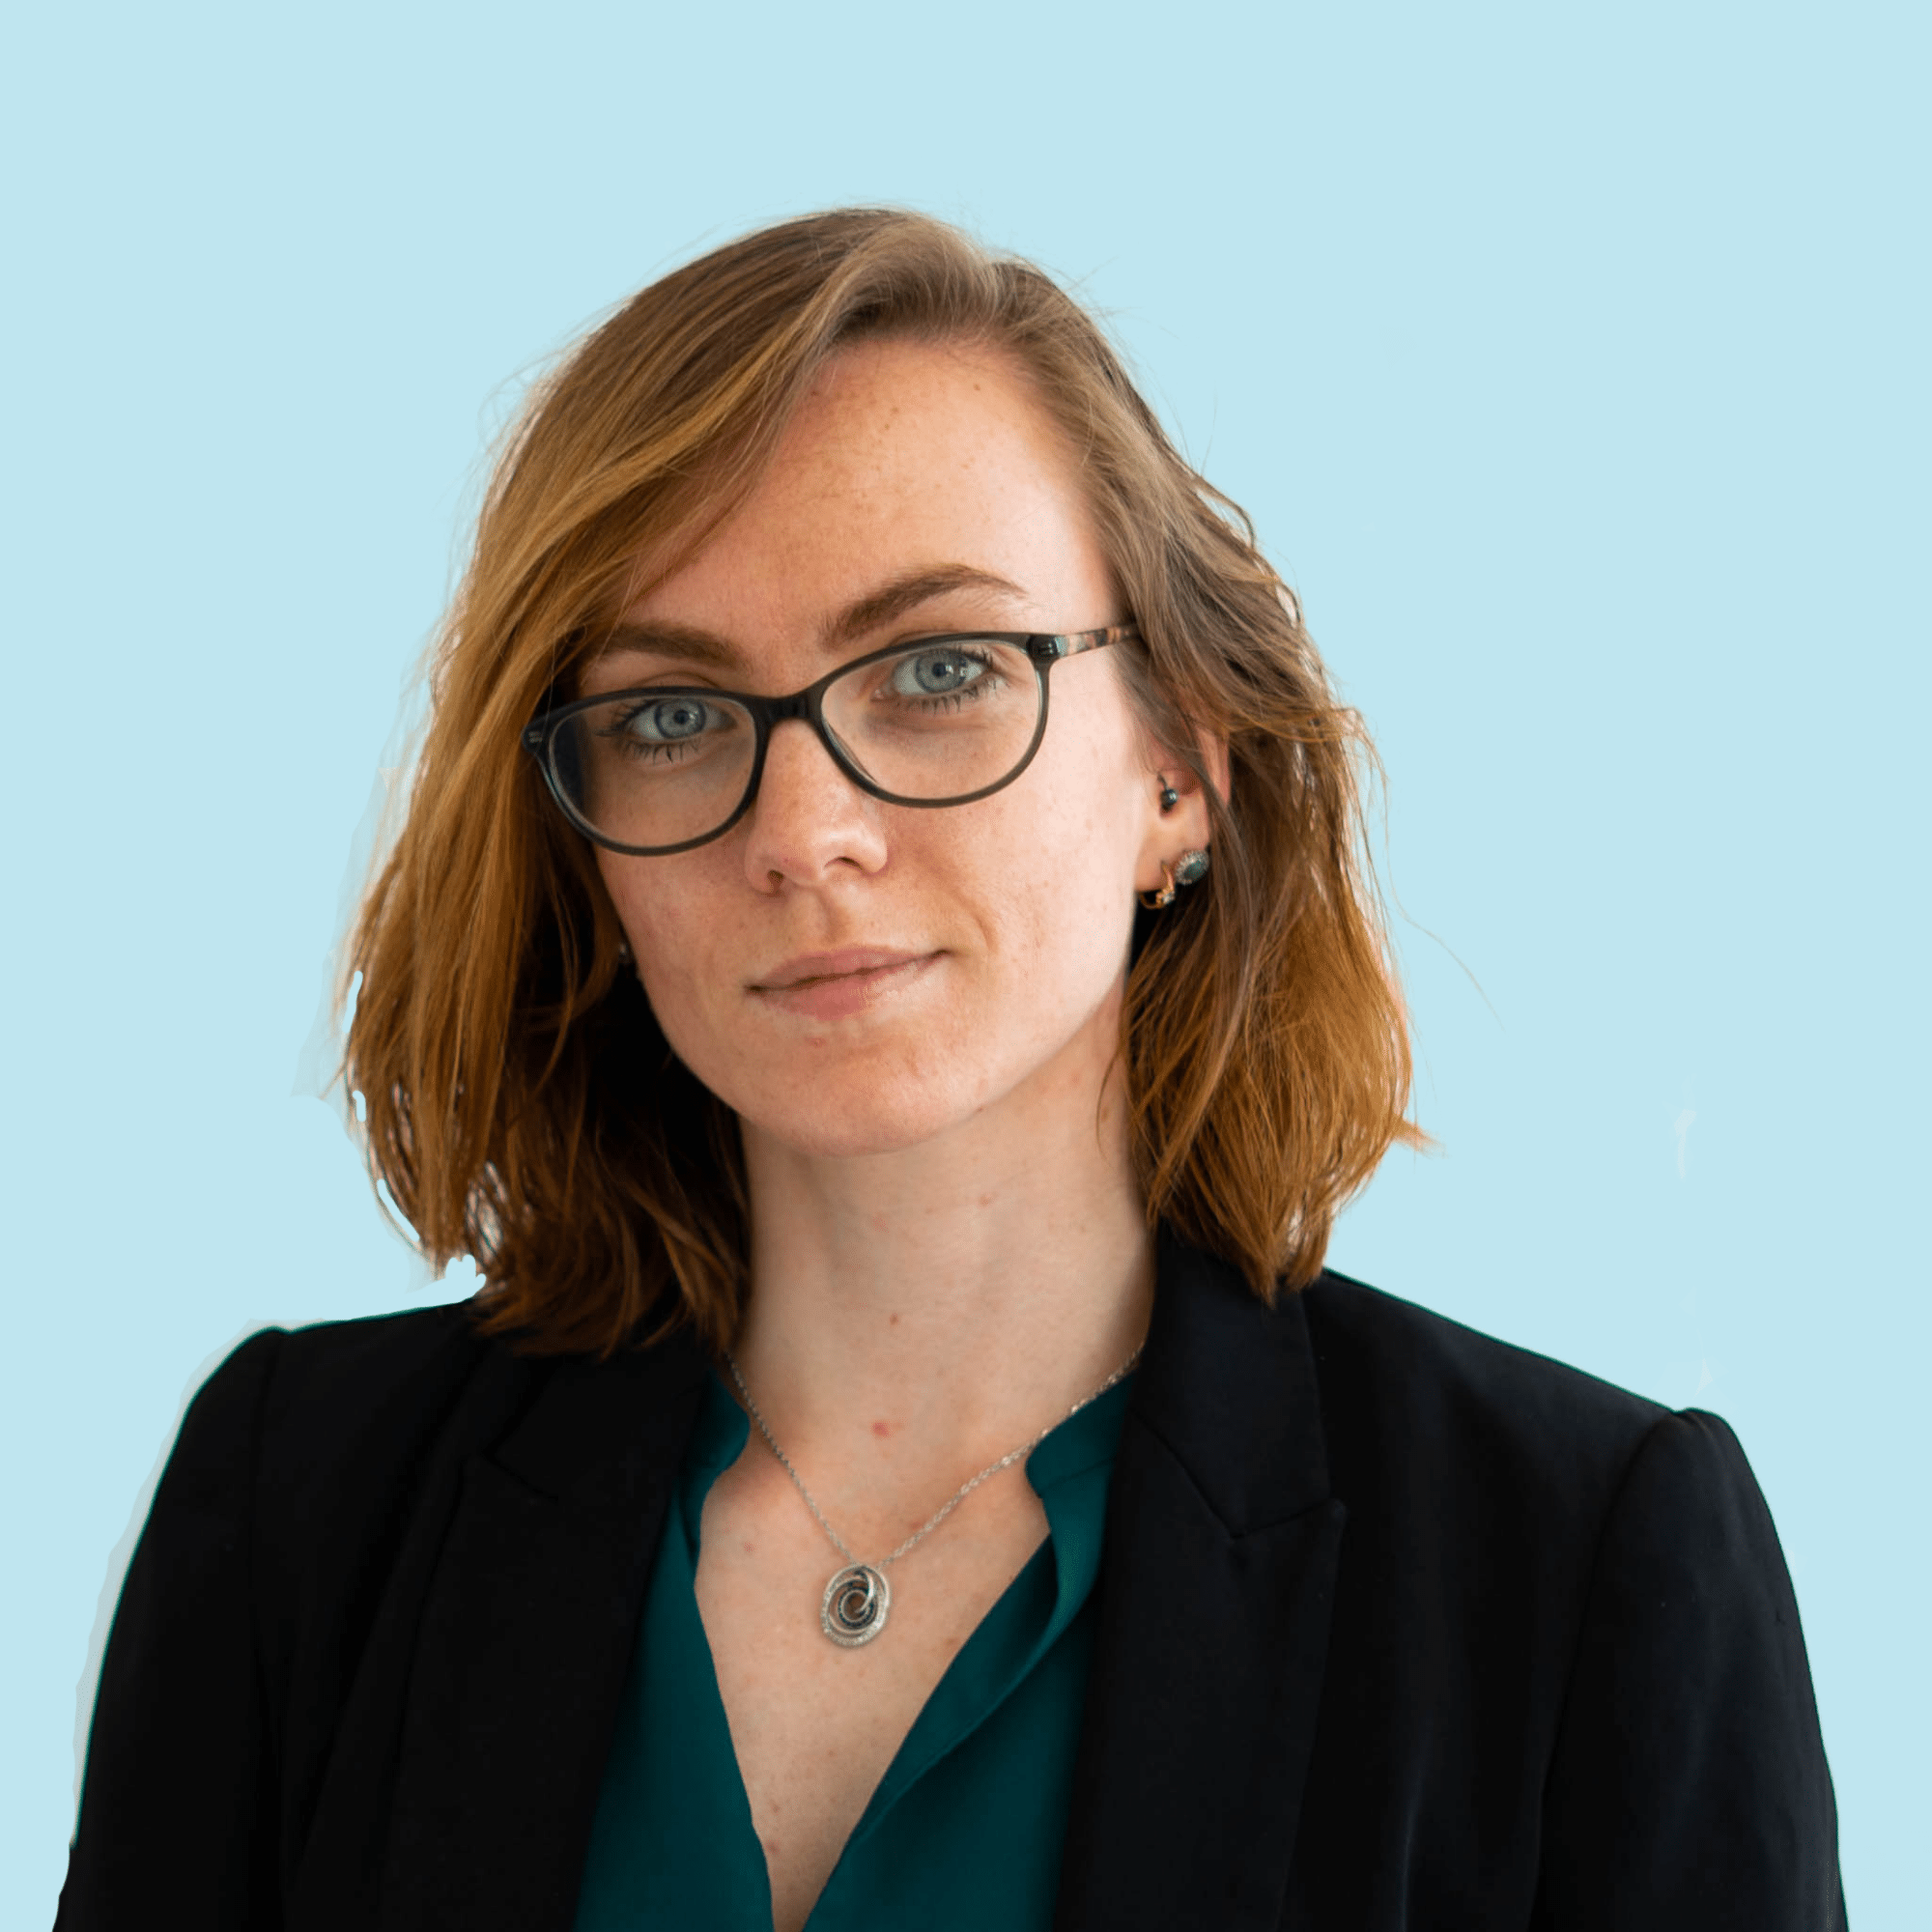 Elisabeth Squires wills and probate solicitor at Britton and Time